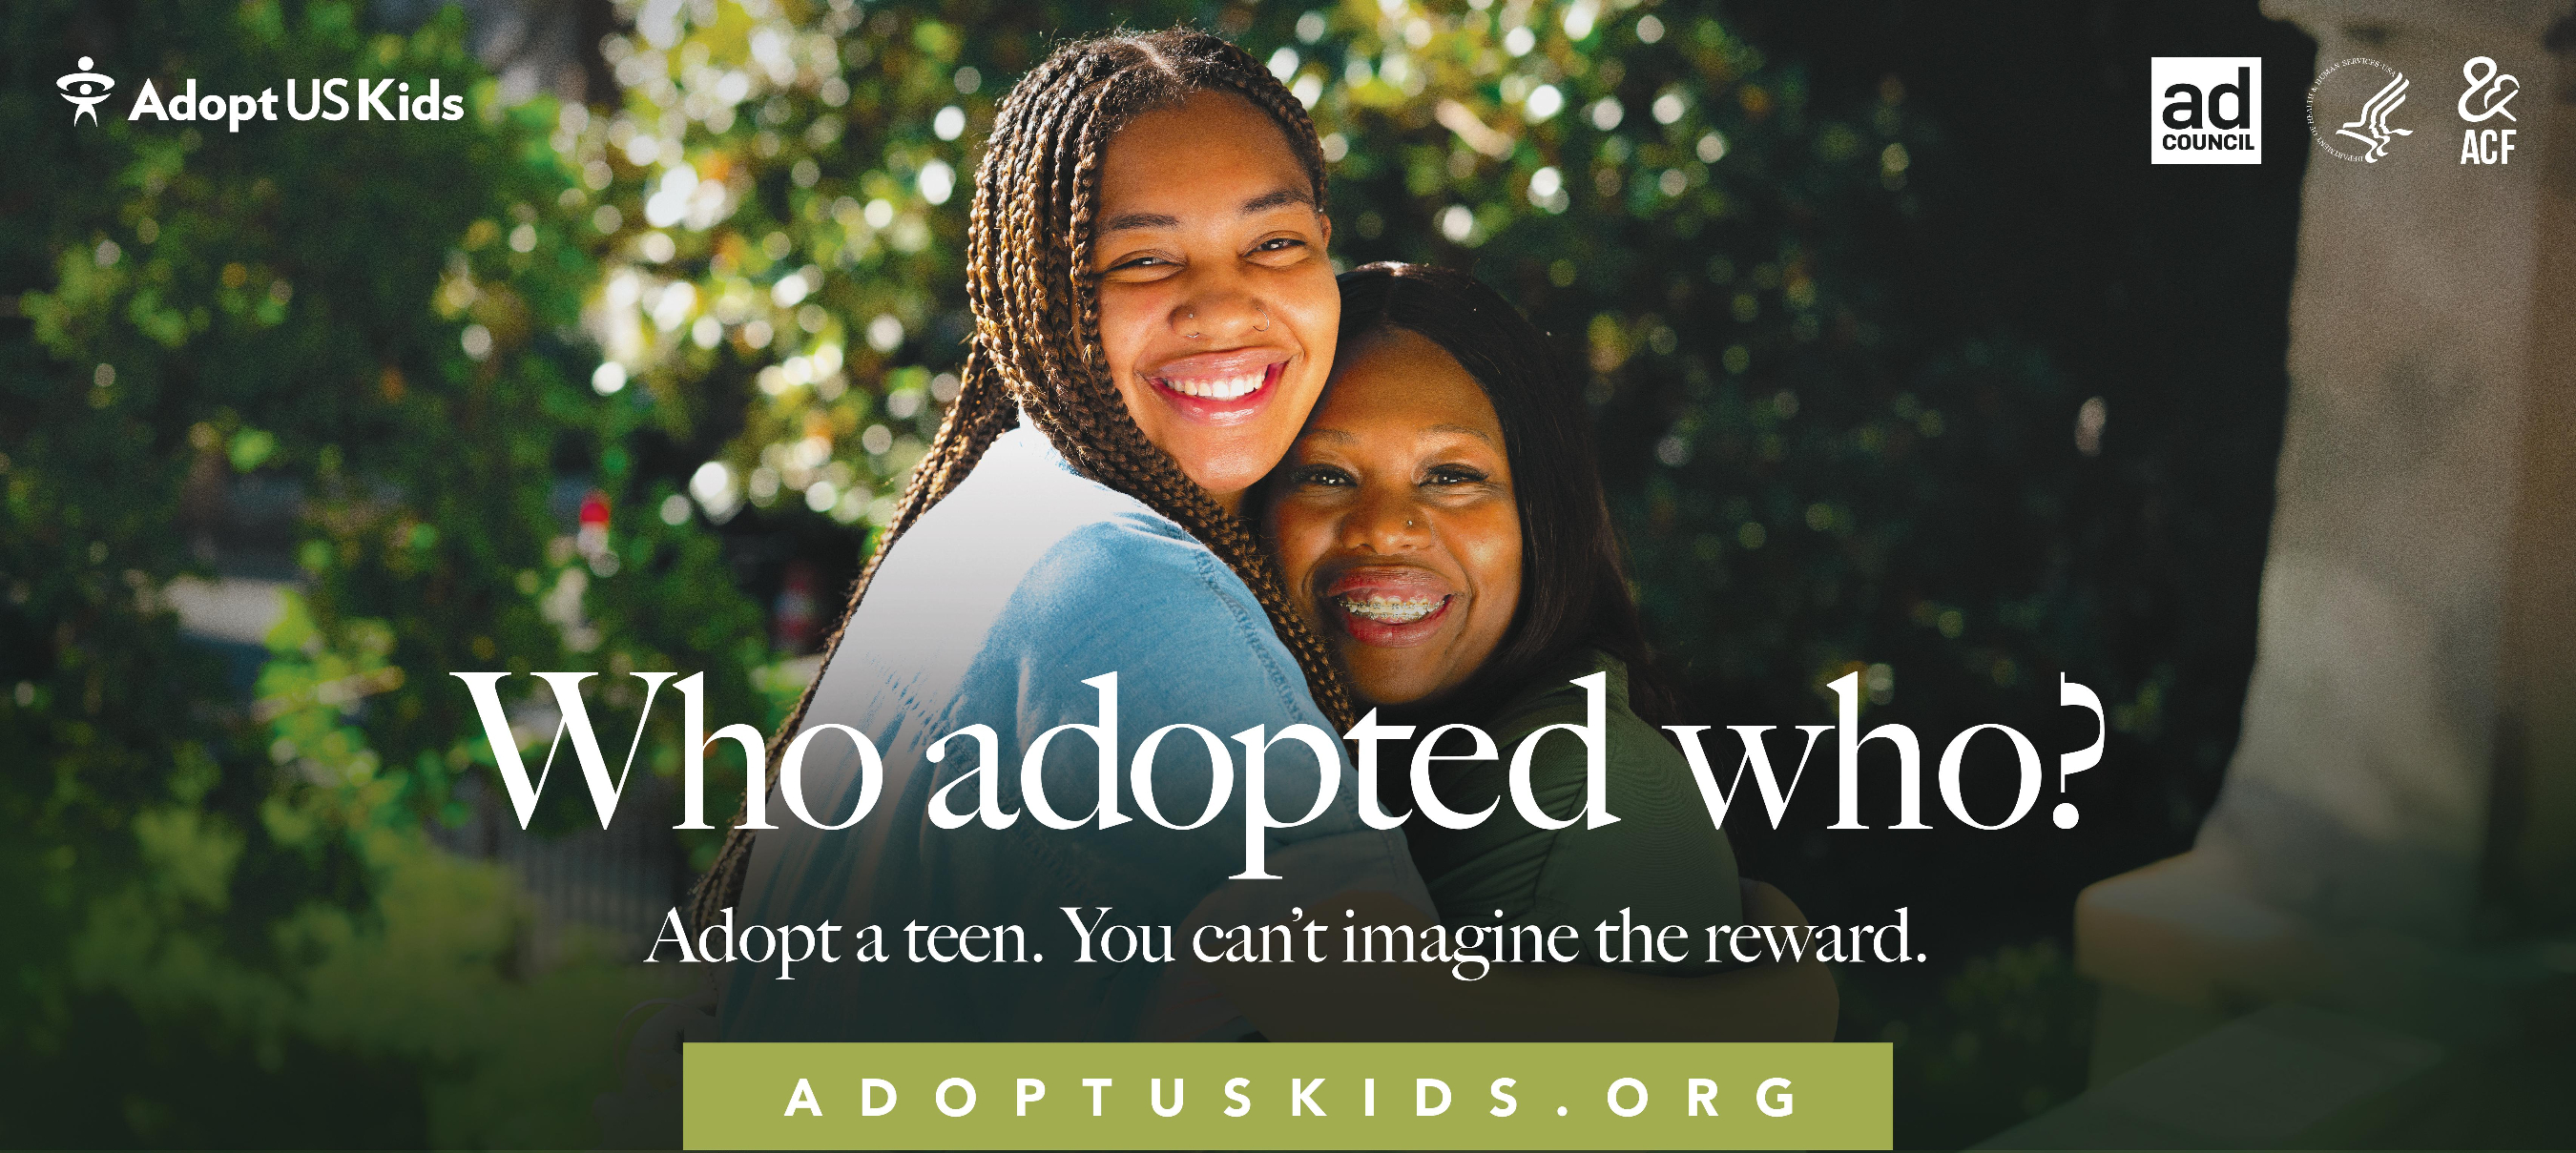 Real Adoptive Parents and Teens Choose Each Other in New Heartwarming PSAs